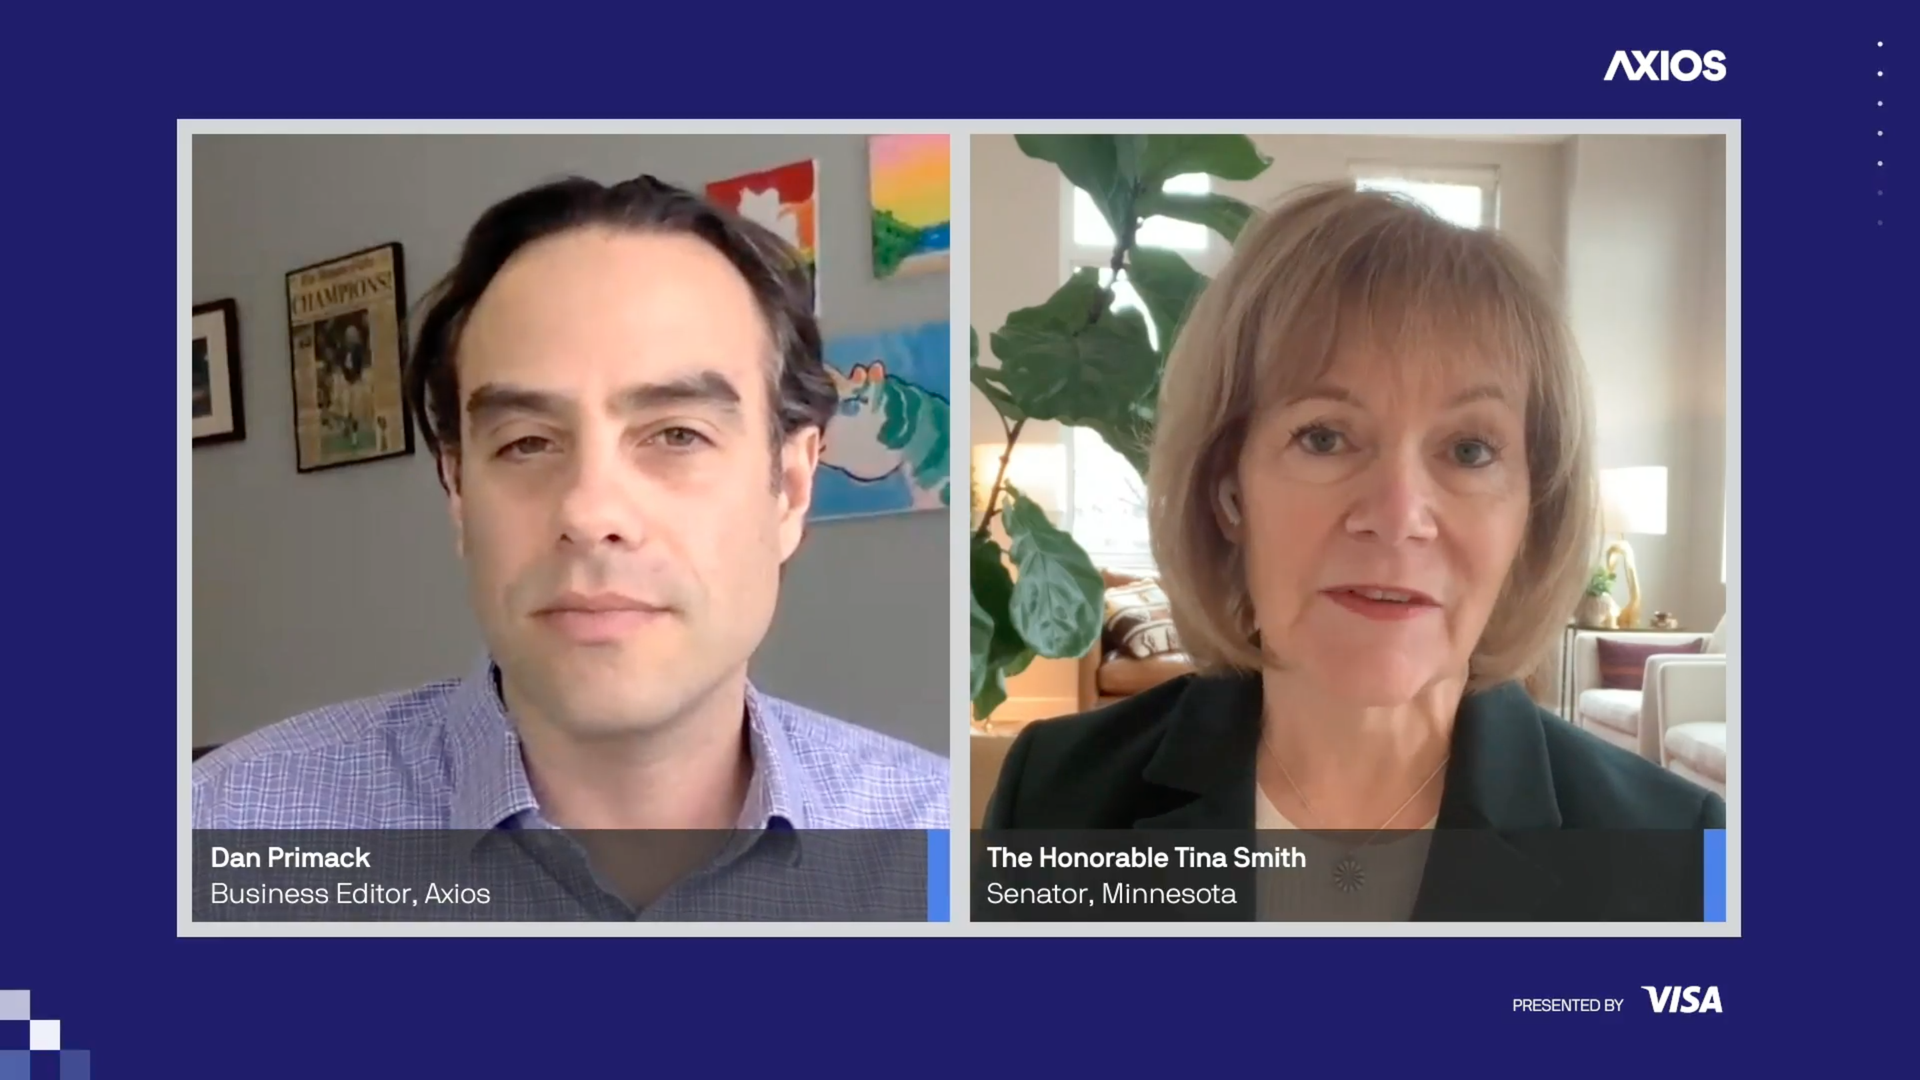 Screenshot of Axios virtual event, with Dan Primack on the left and Sen. Tina Smith on the right